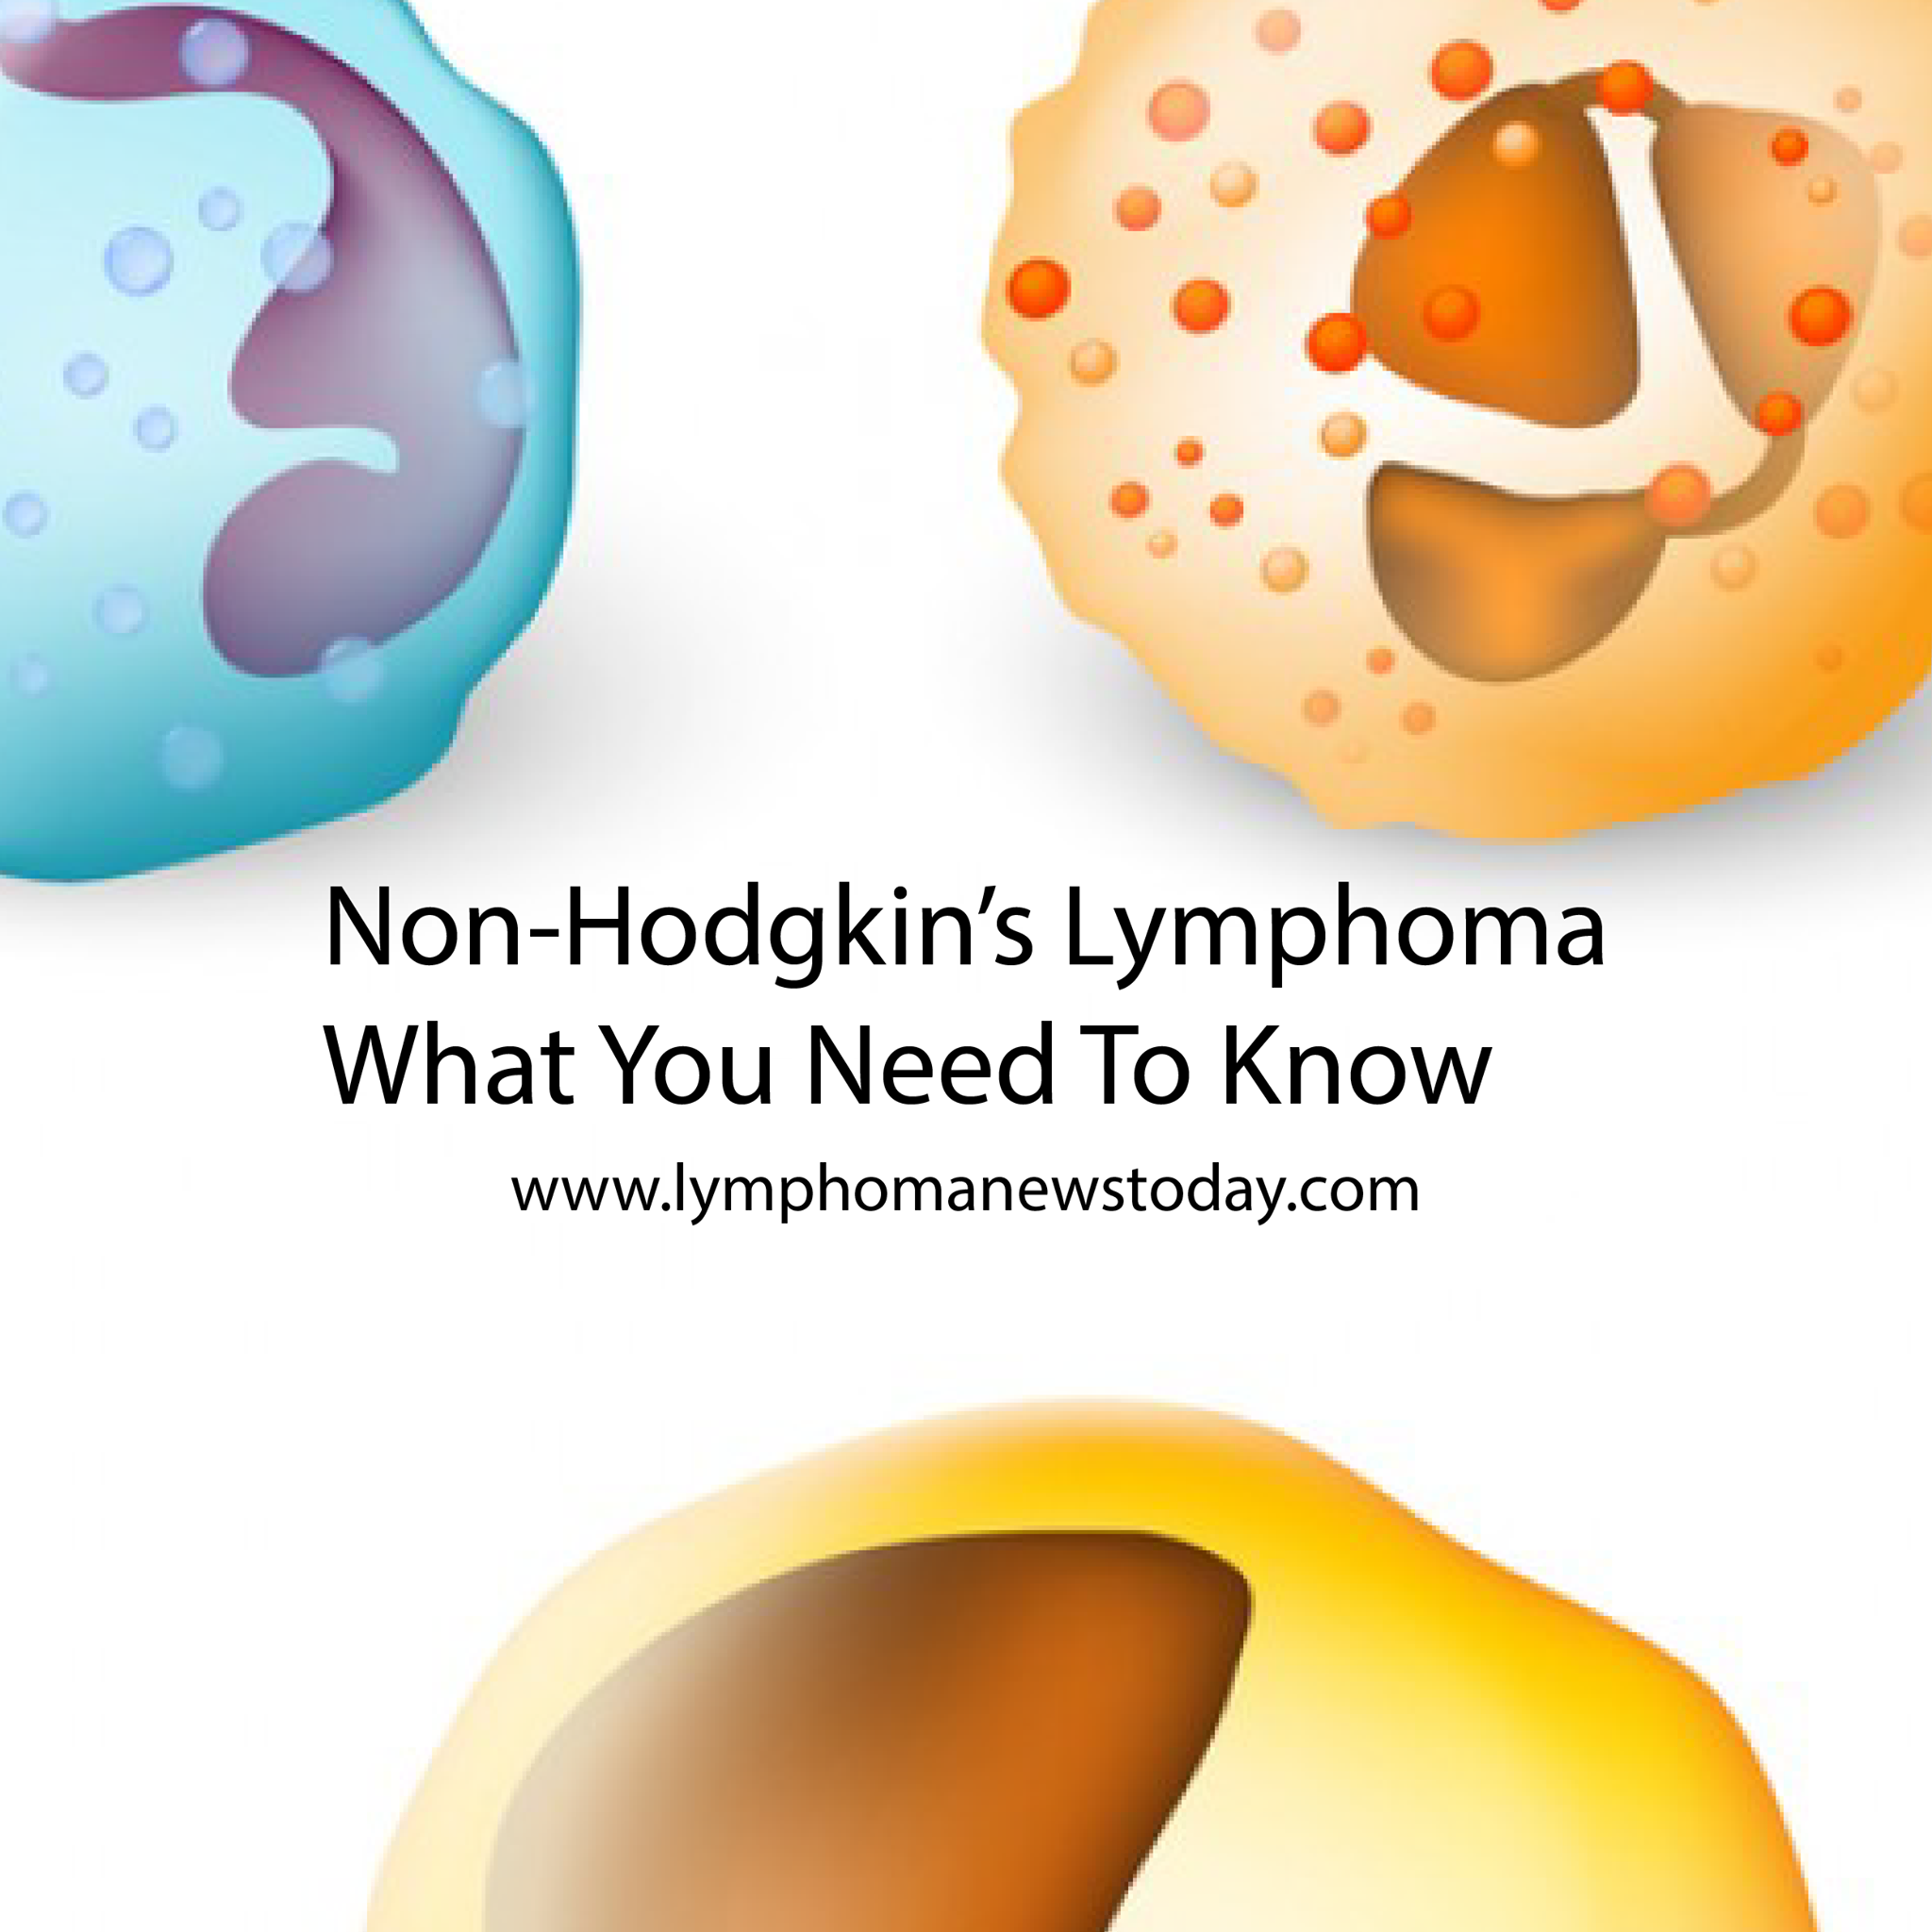 All You Need To Know About Non-Hodgkin’s Lymphoma